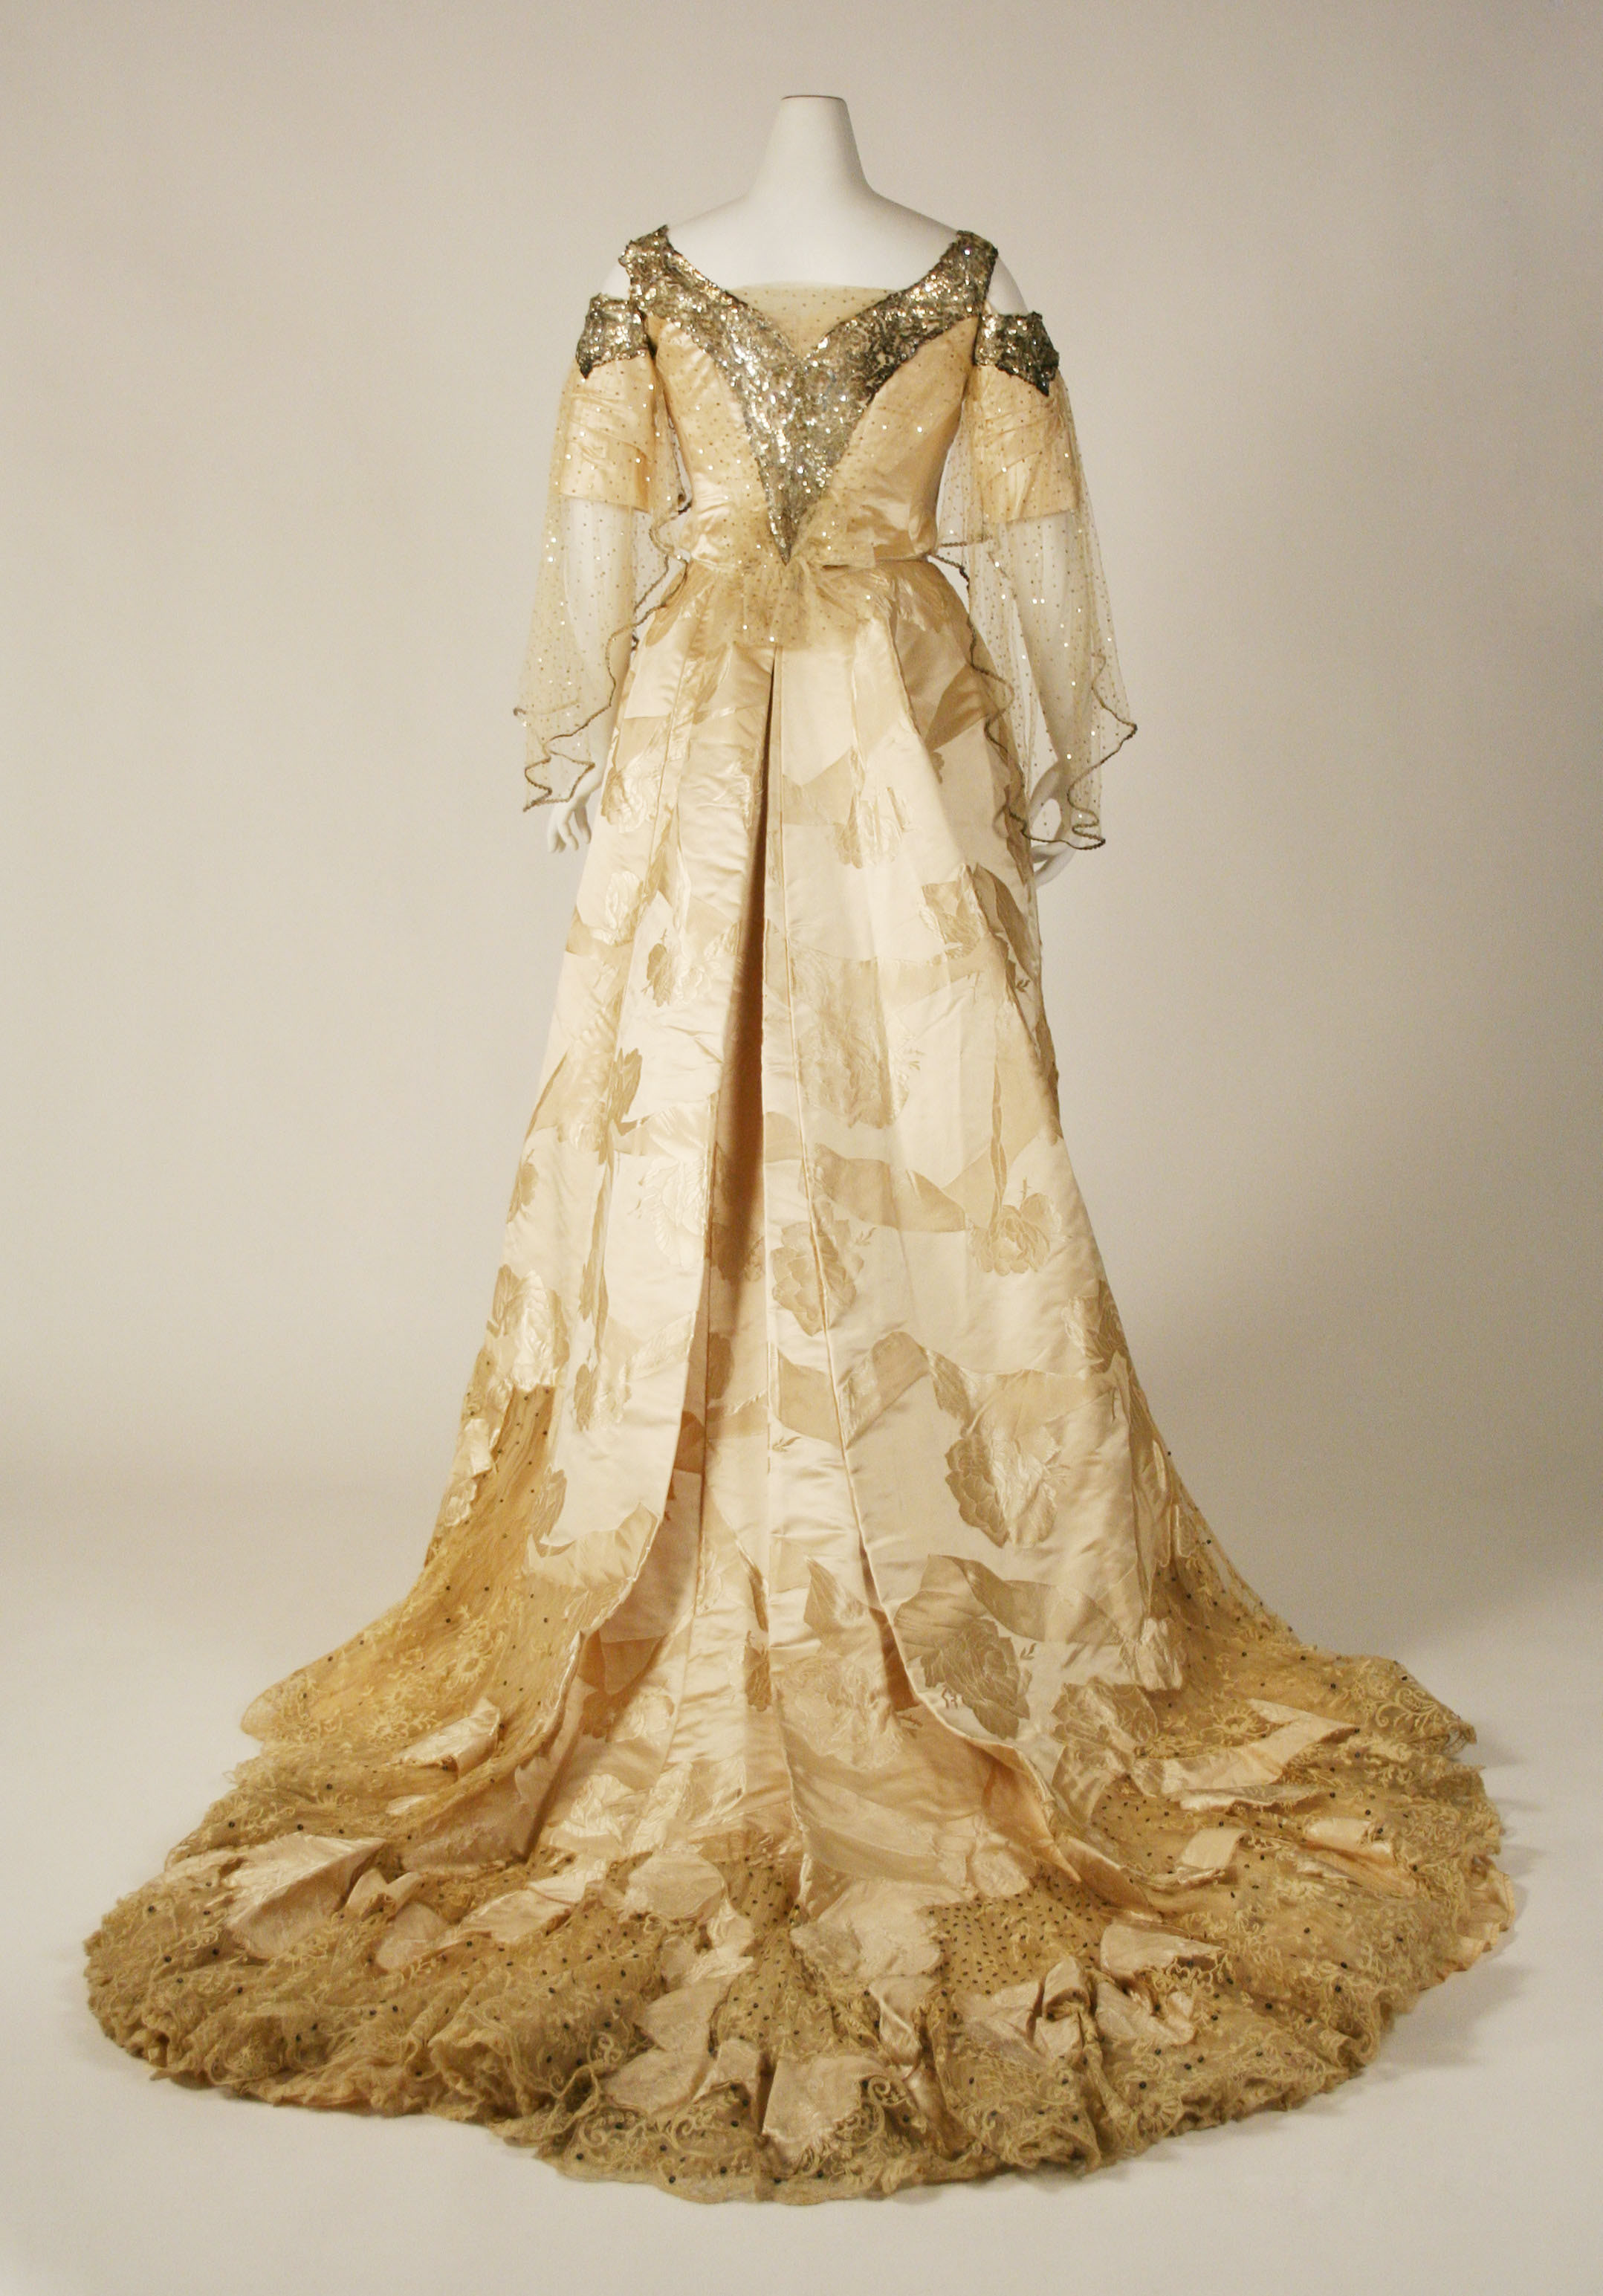 House of Worth | Ball gown | French | The Metropolitan Museum of Art